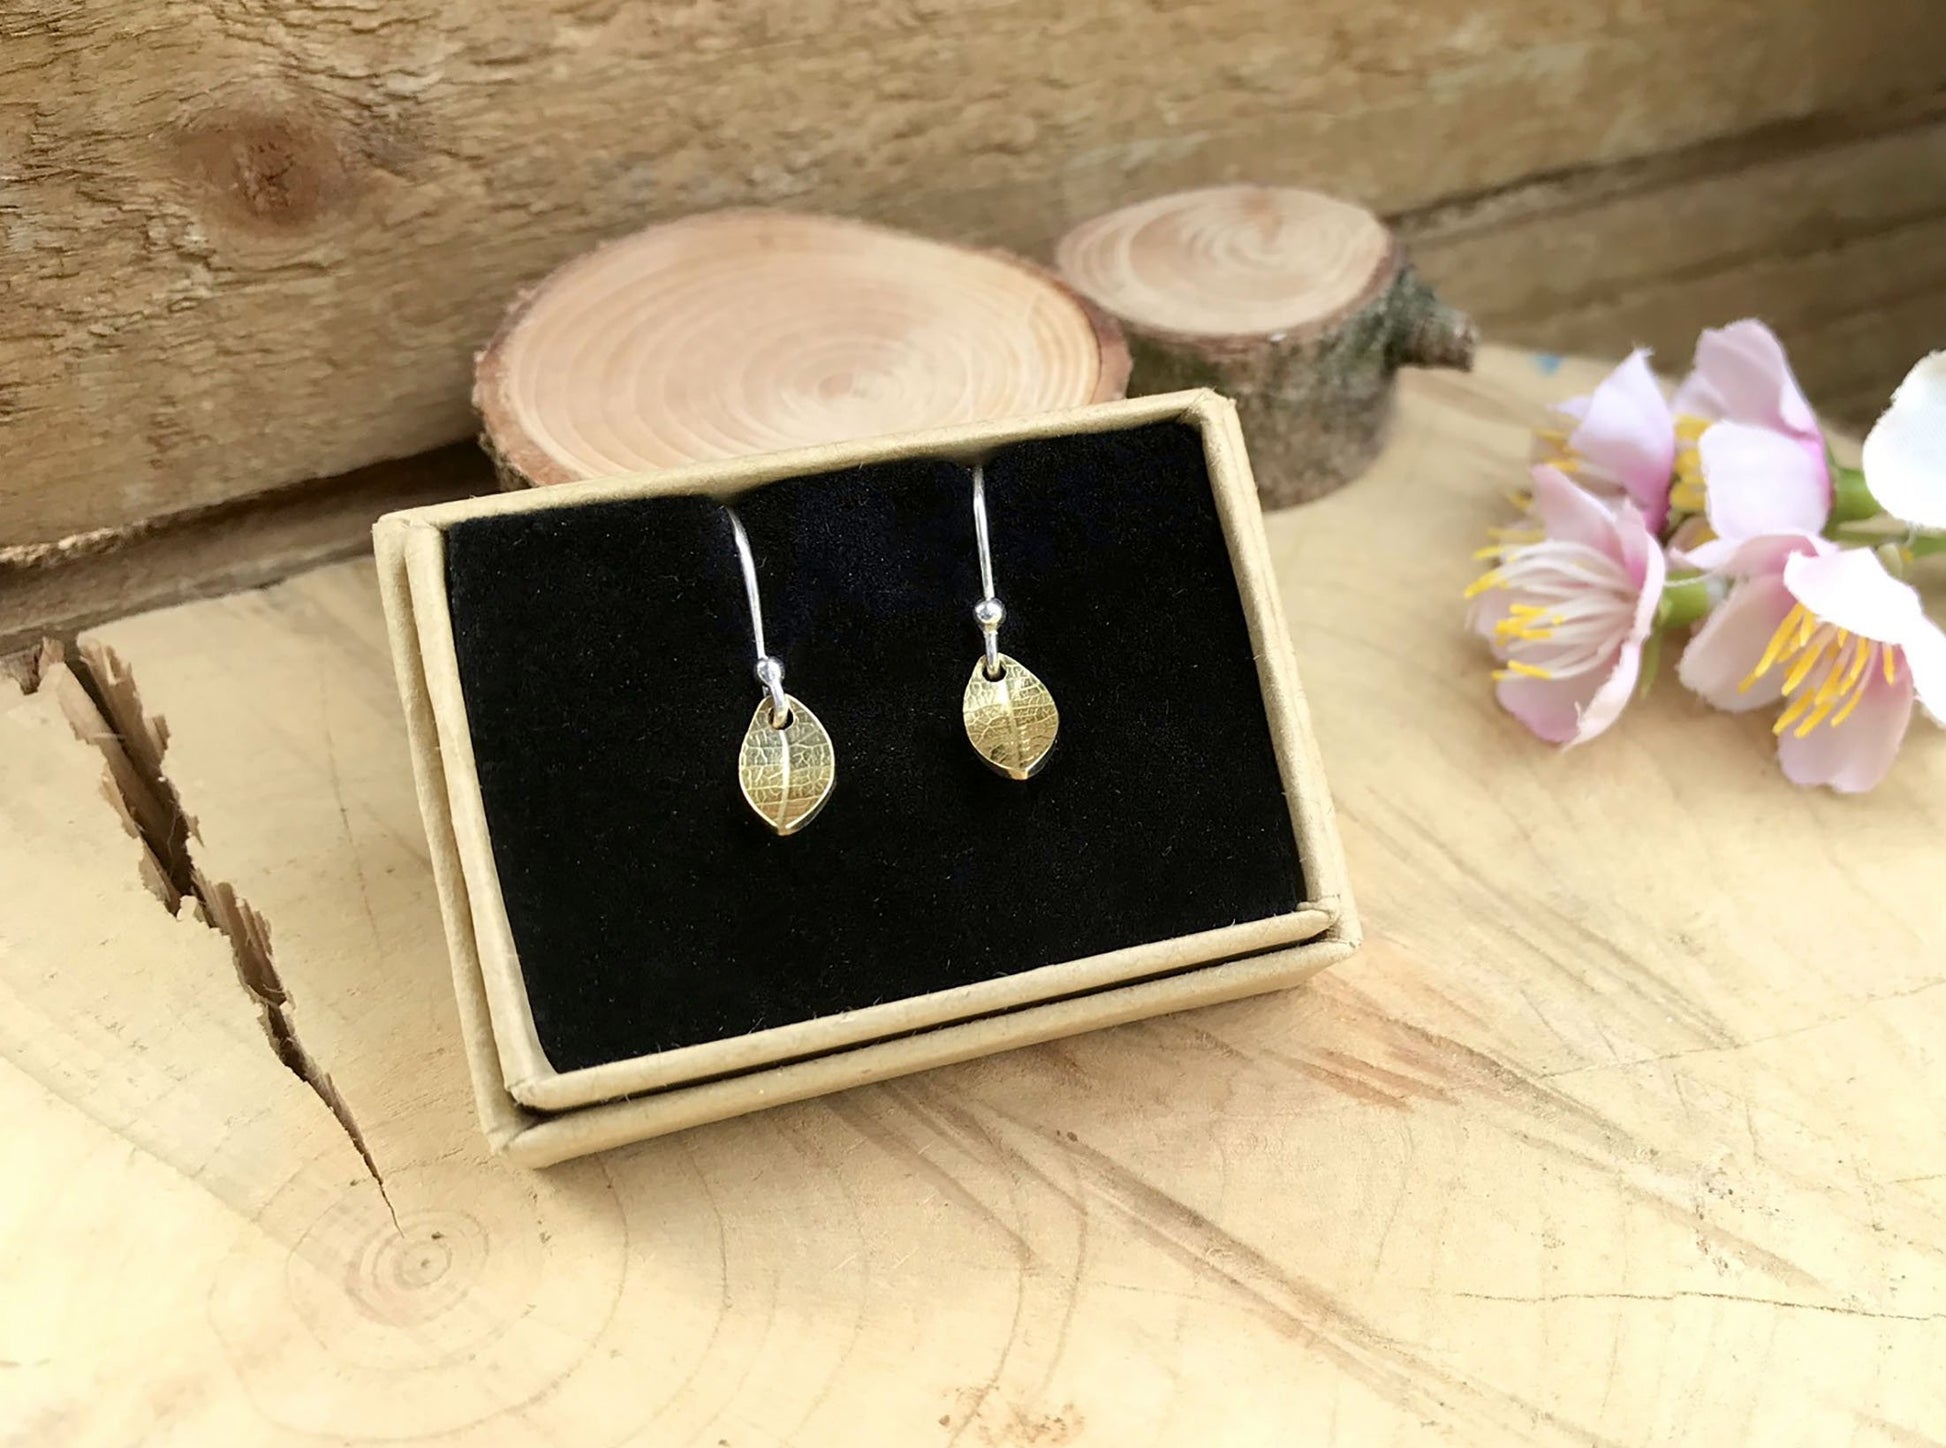 Silver hook earrings featuring tiny gold leaves by Curious Magpie Jewellery